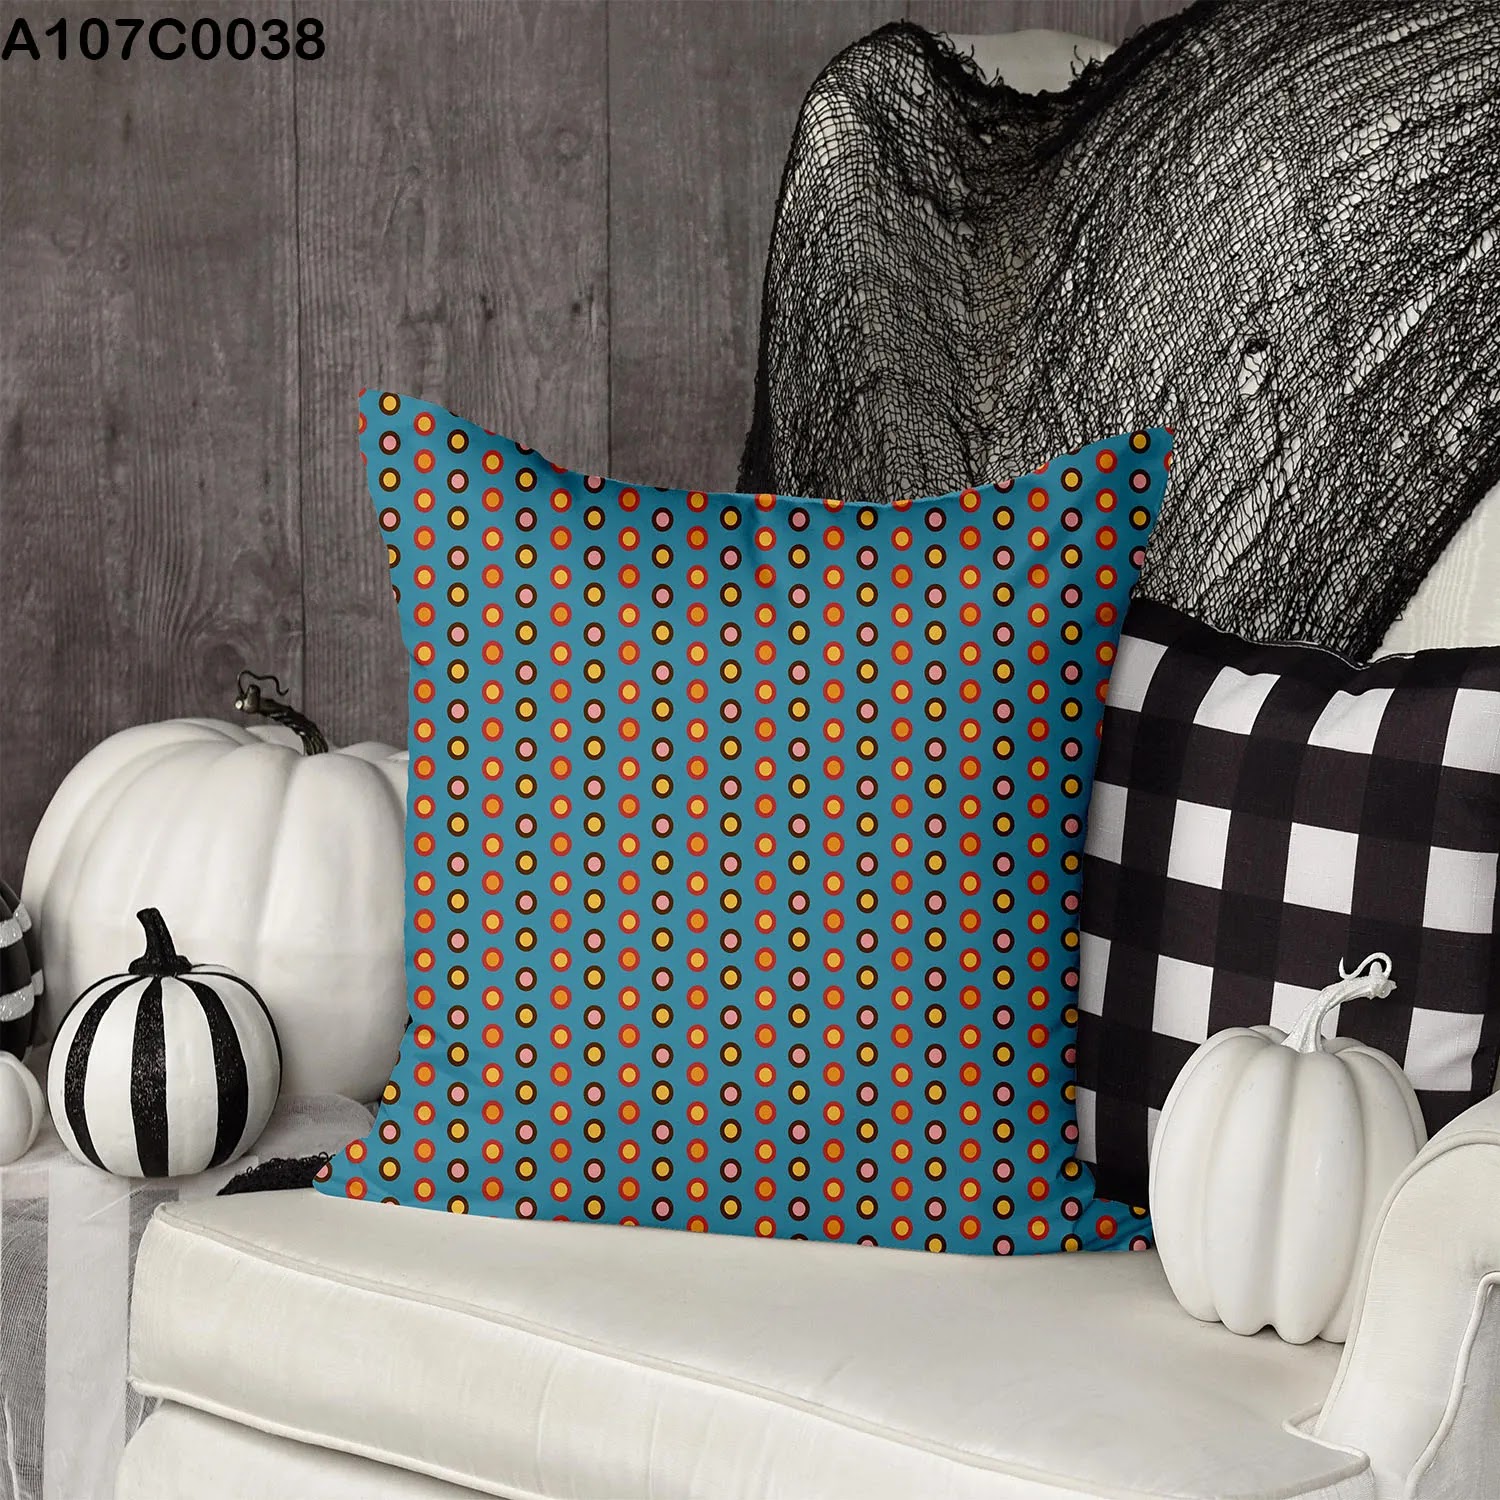 Dark blue pillow case with small yellow & orange patches